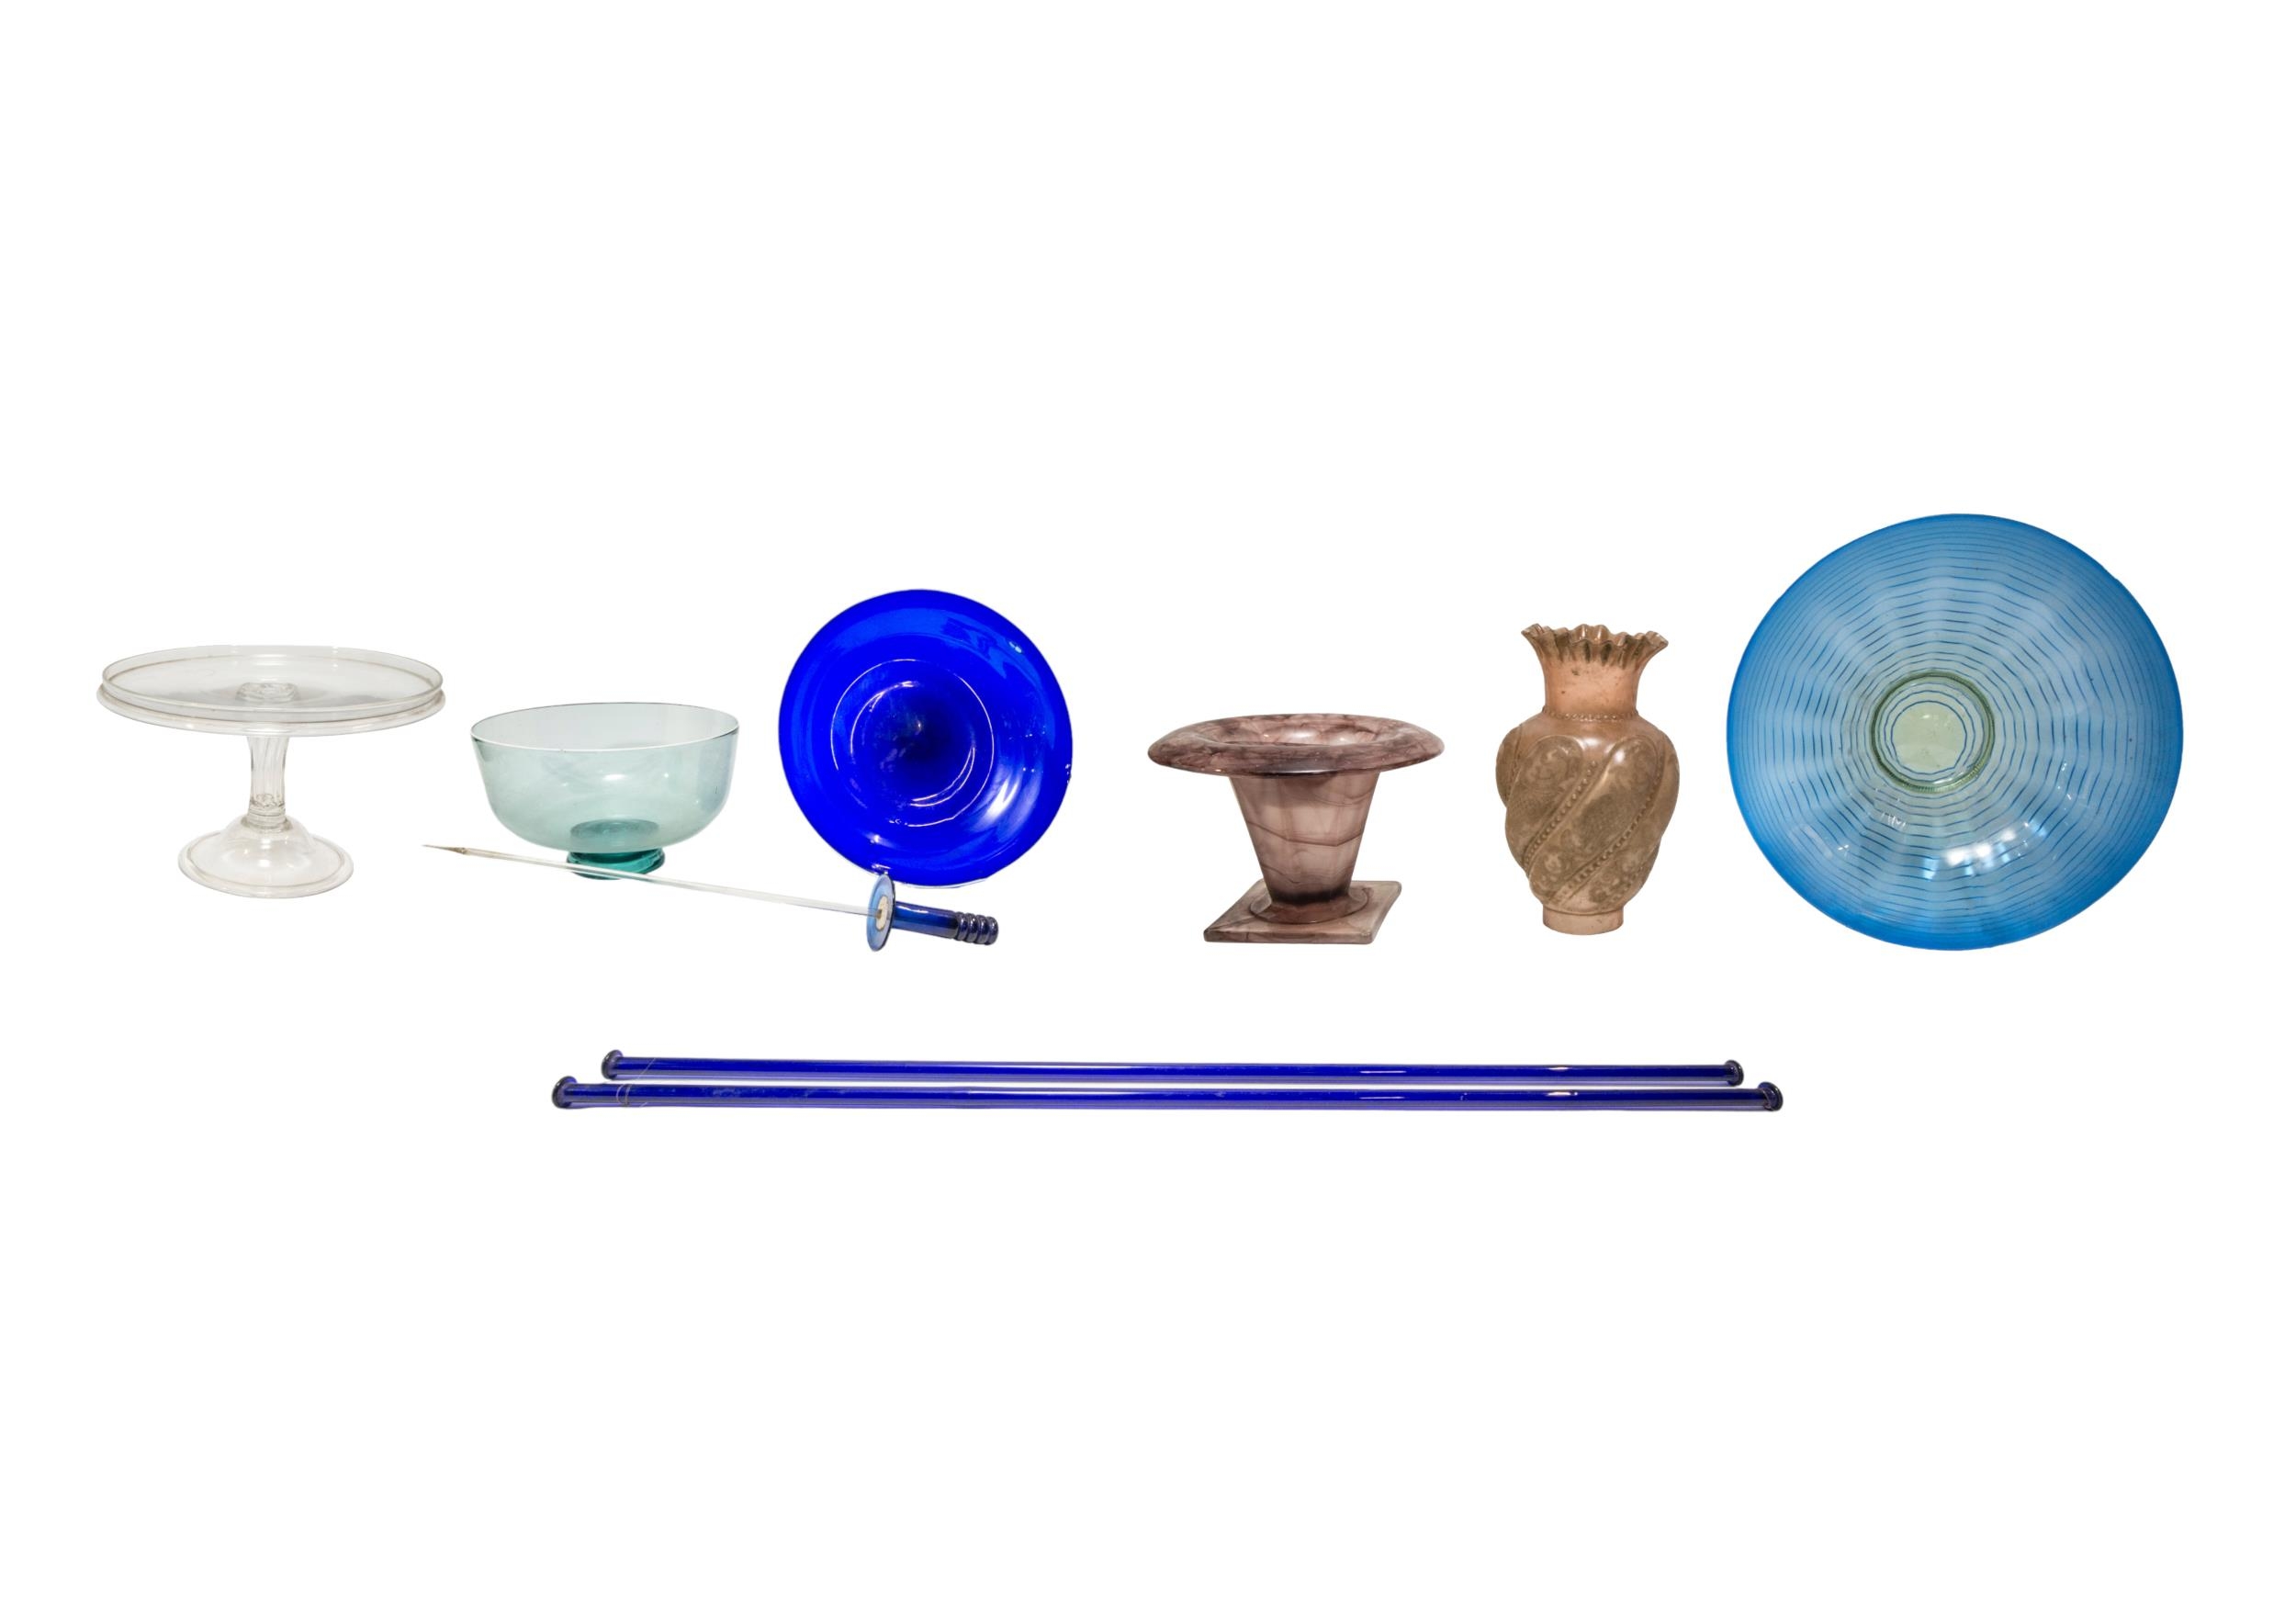 A MIXED GROUP OF VINTAGE GLASS WARE, the lot includes an 18th century tazza, elegant art deco